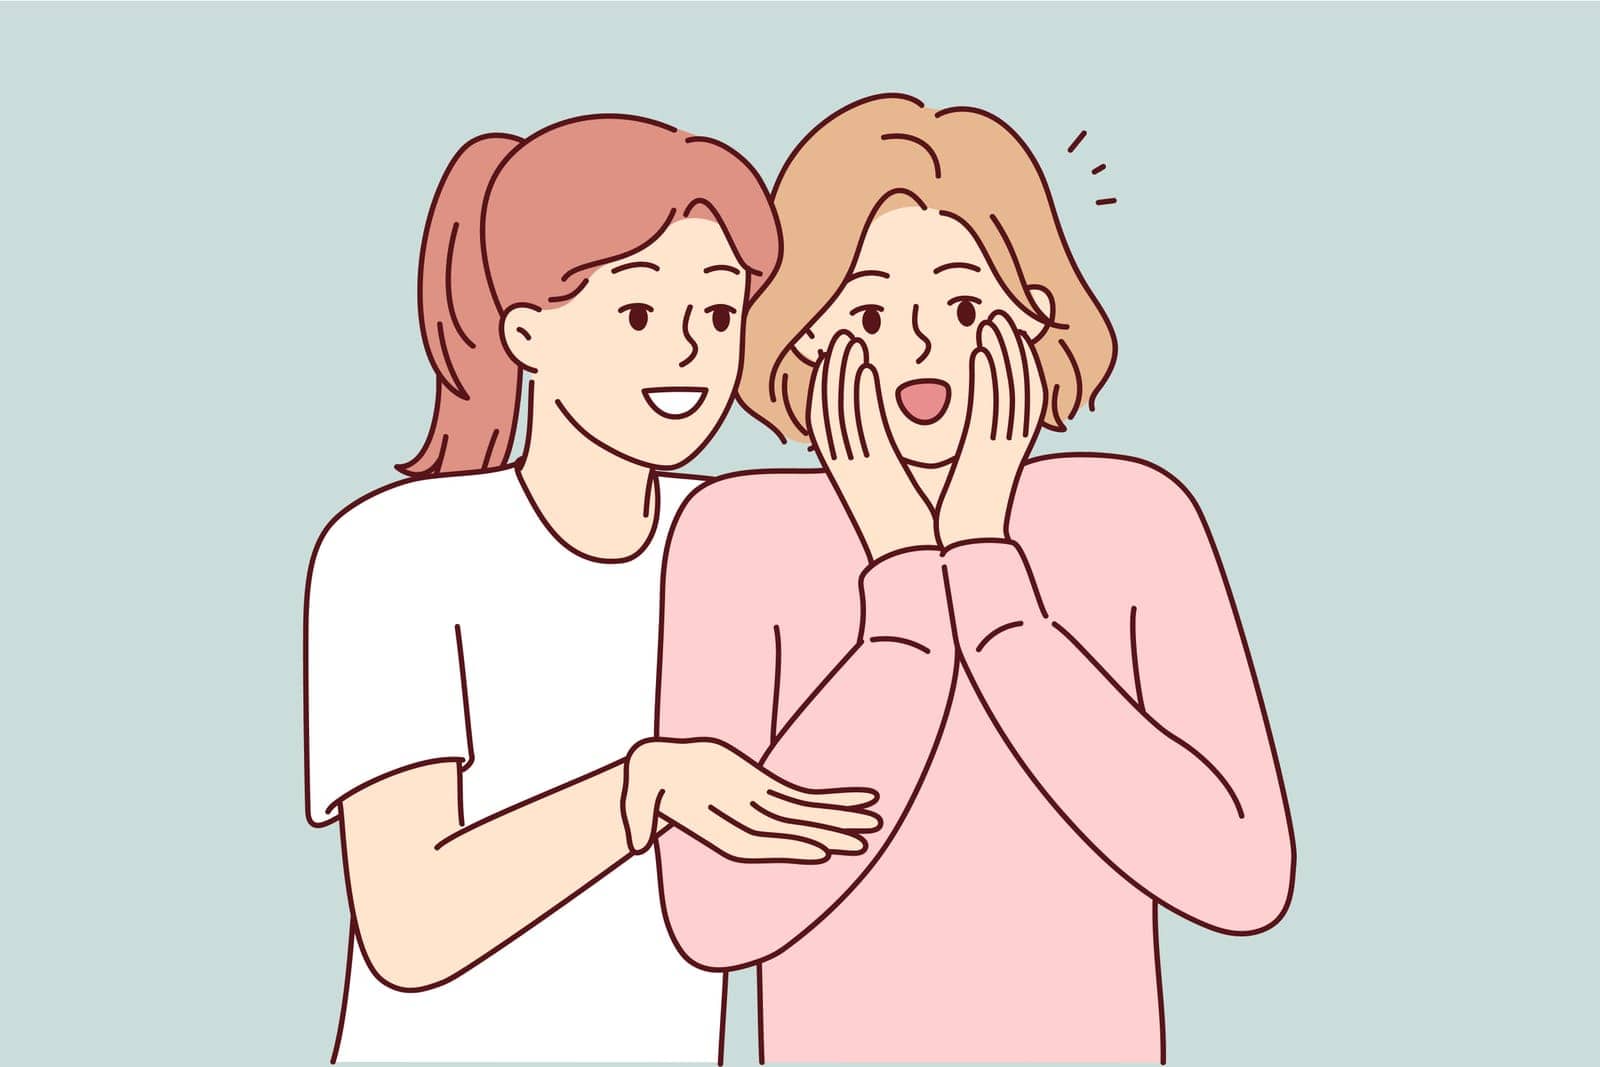 Woman shares gossip with friend by telling stories she read in tabloids or Internet. Girl is surprised to open mouth wide when she hears unexpected facts or sees attractive guy. Flat vector image